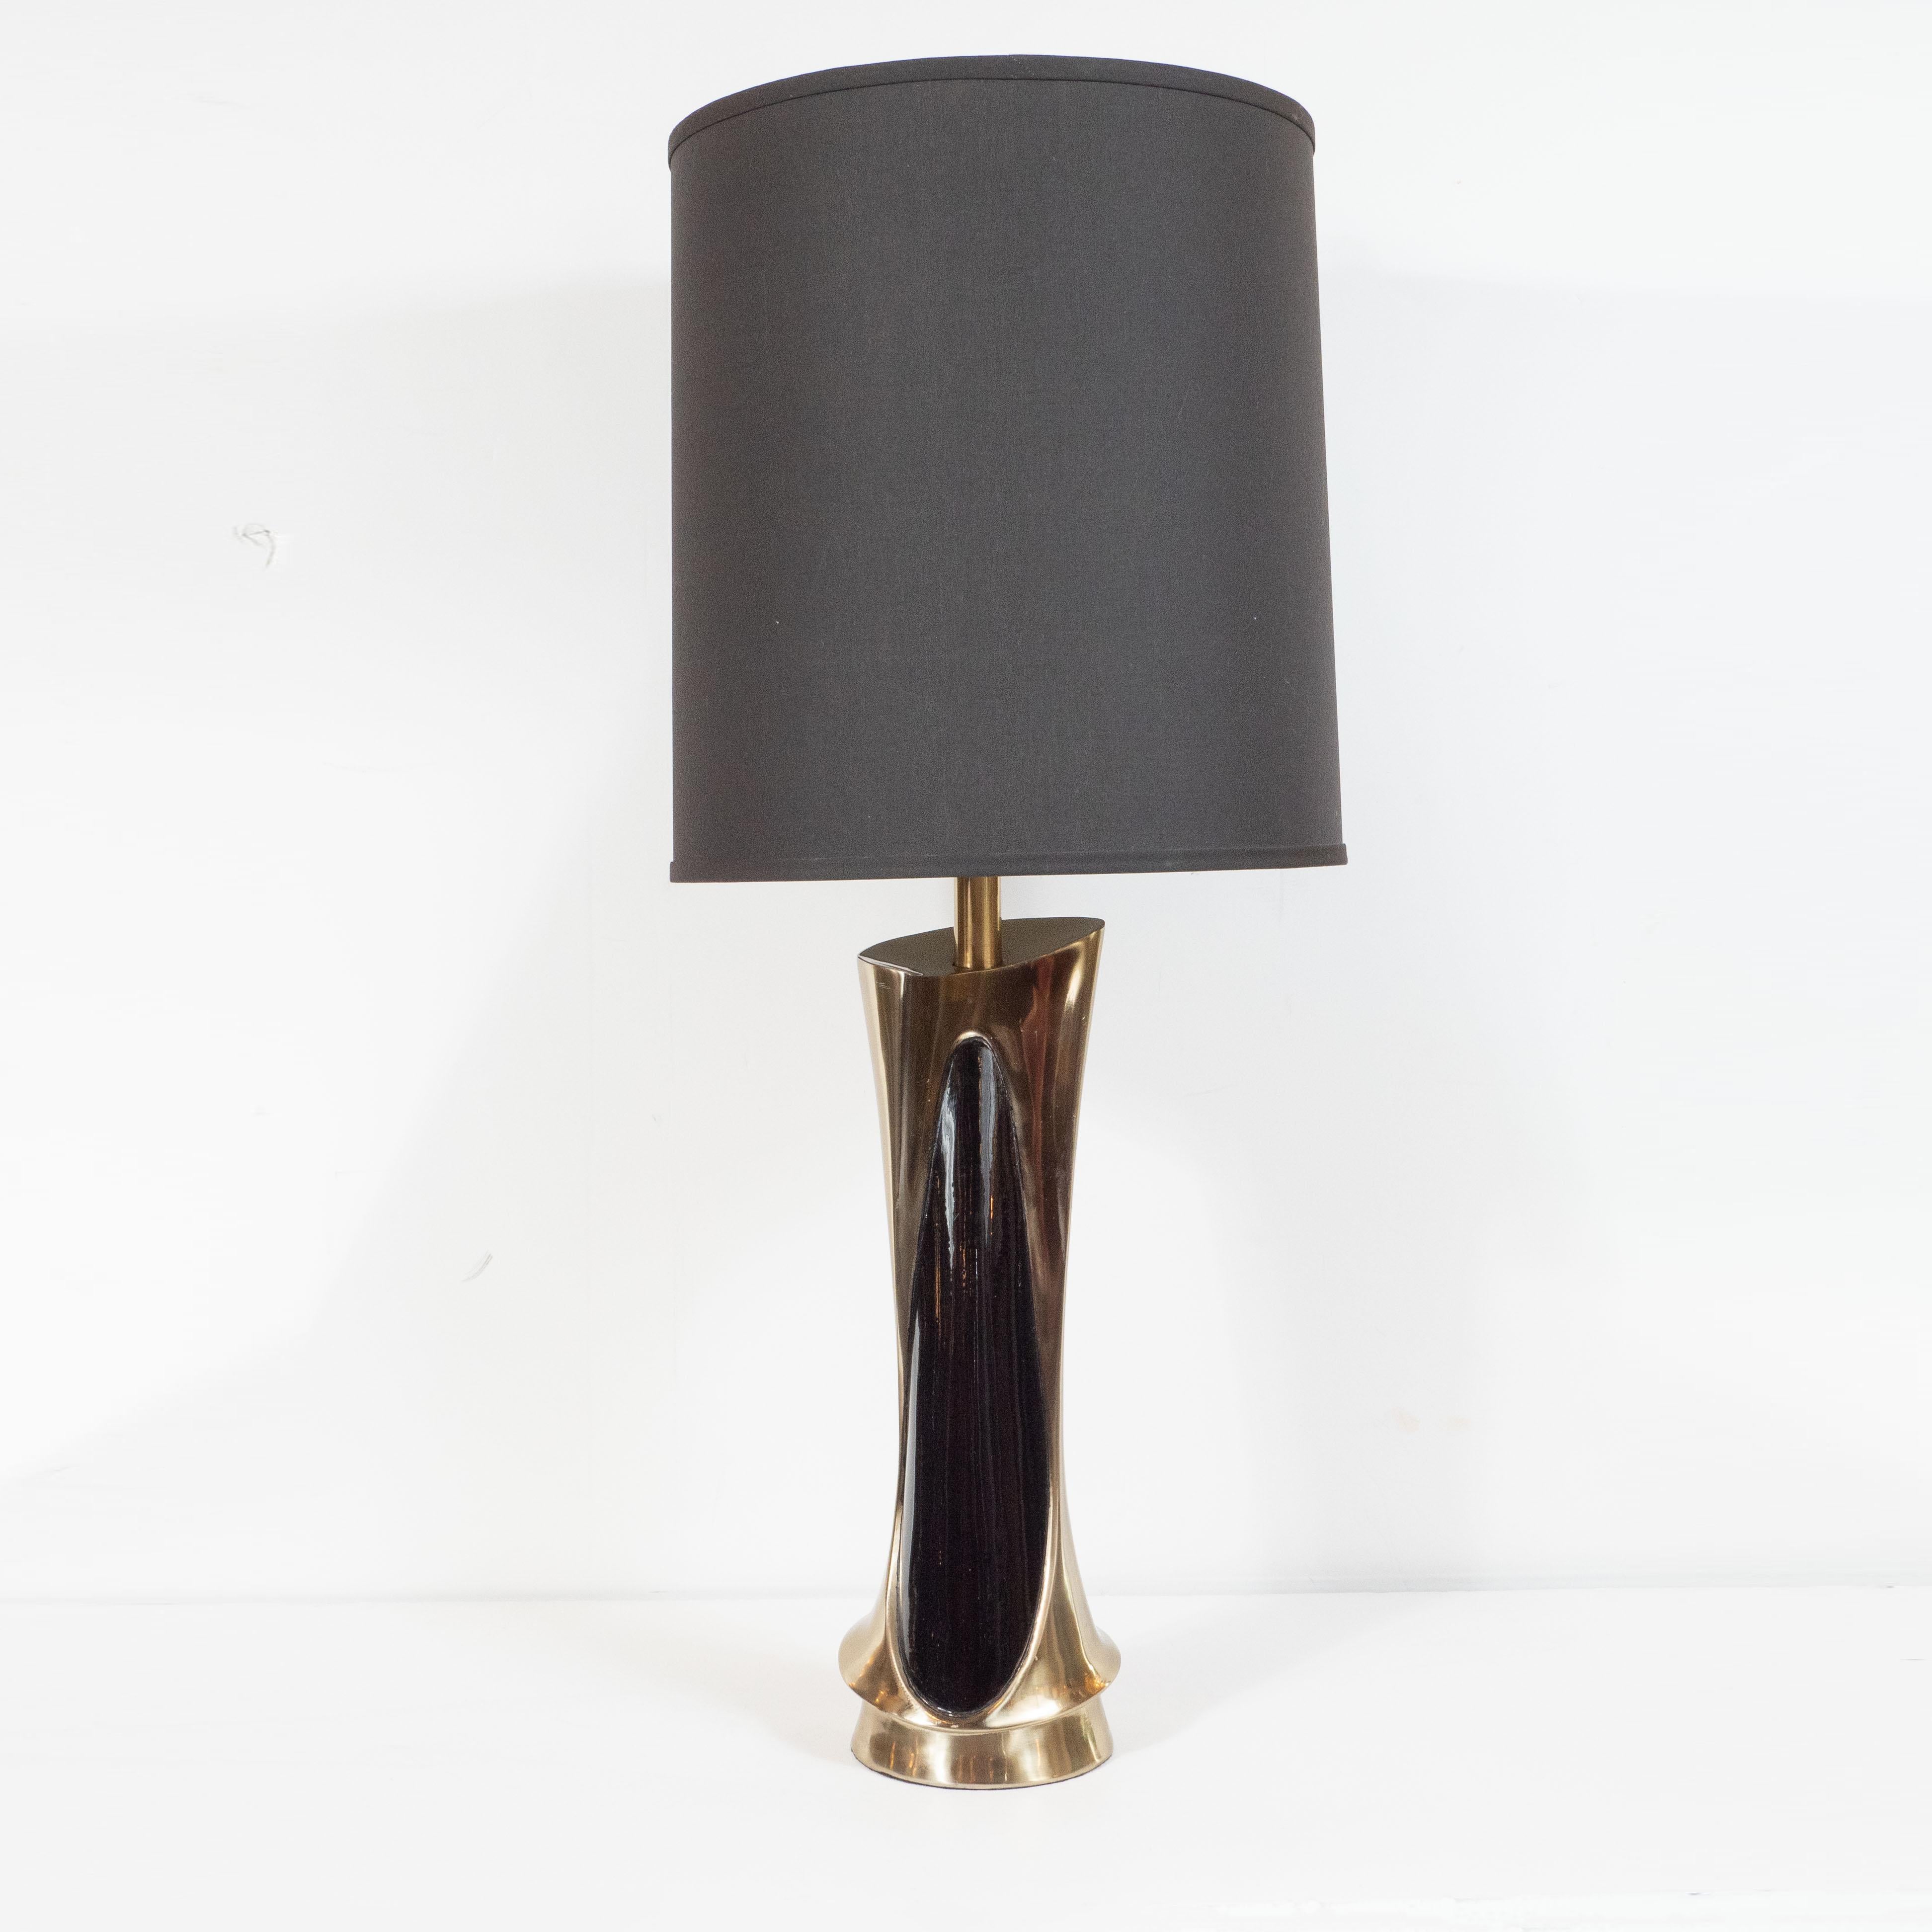 Mid-Century Modern Pair of Midcentury Brass and Ebonized Walnut Table Lamps by Laurel & Co.